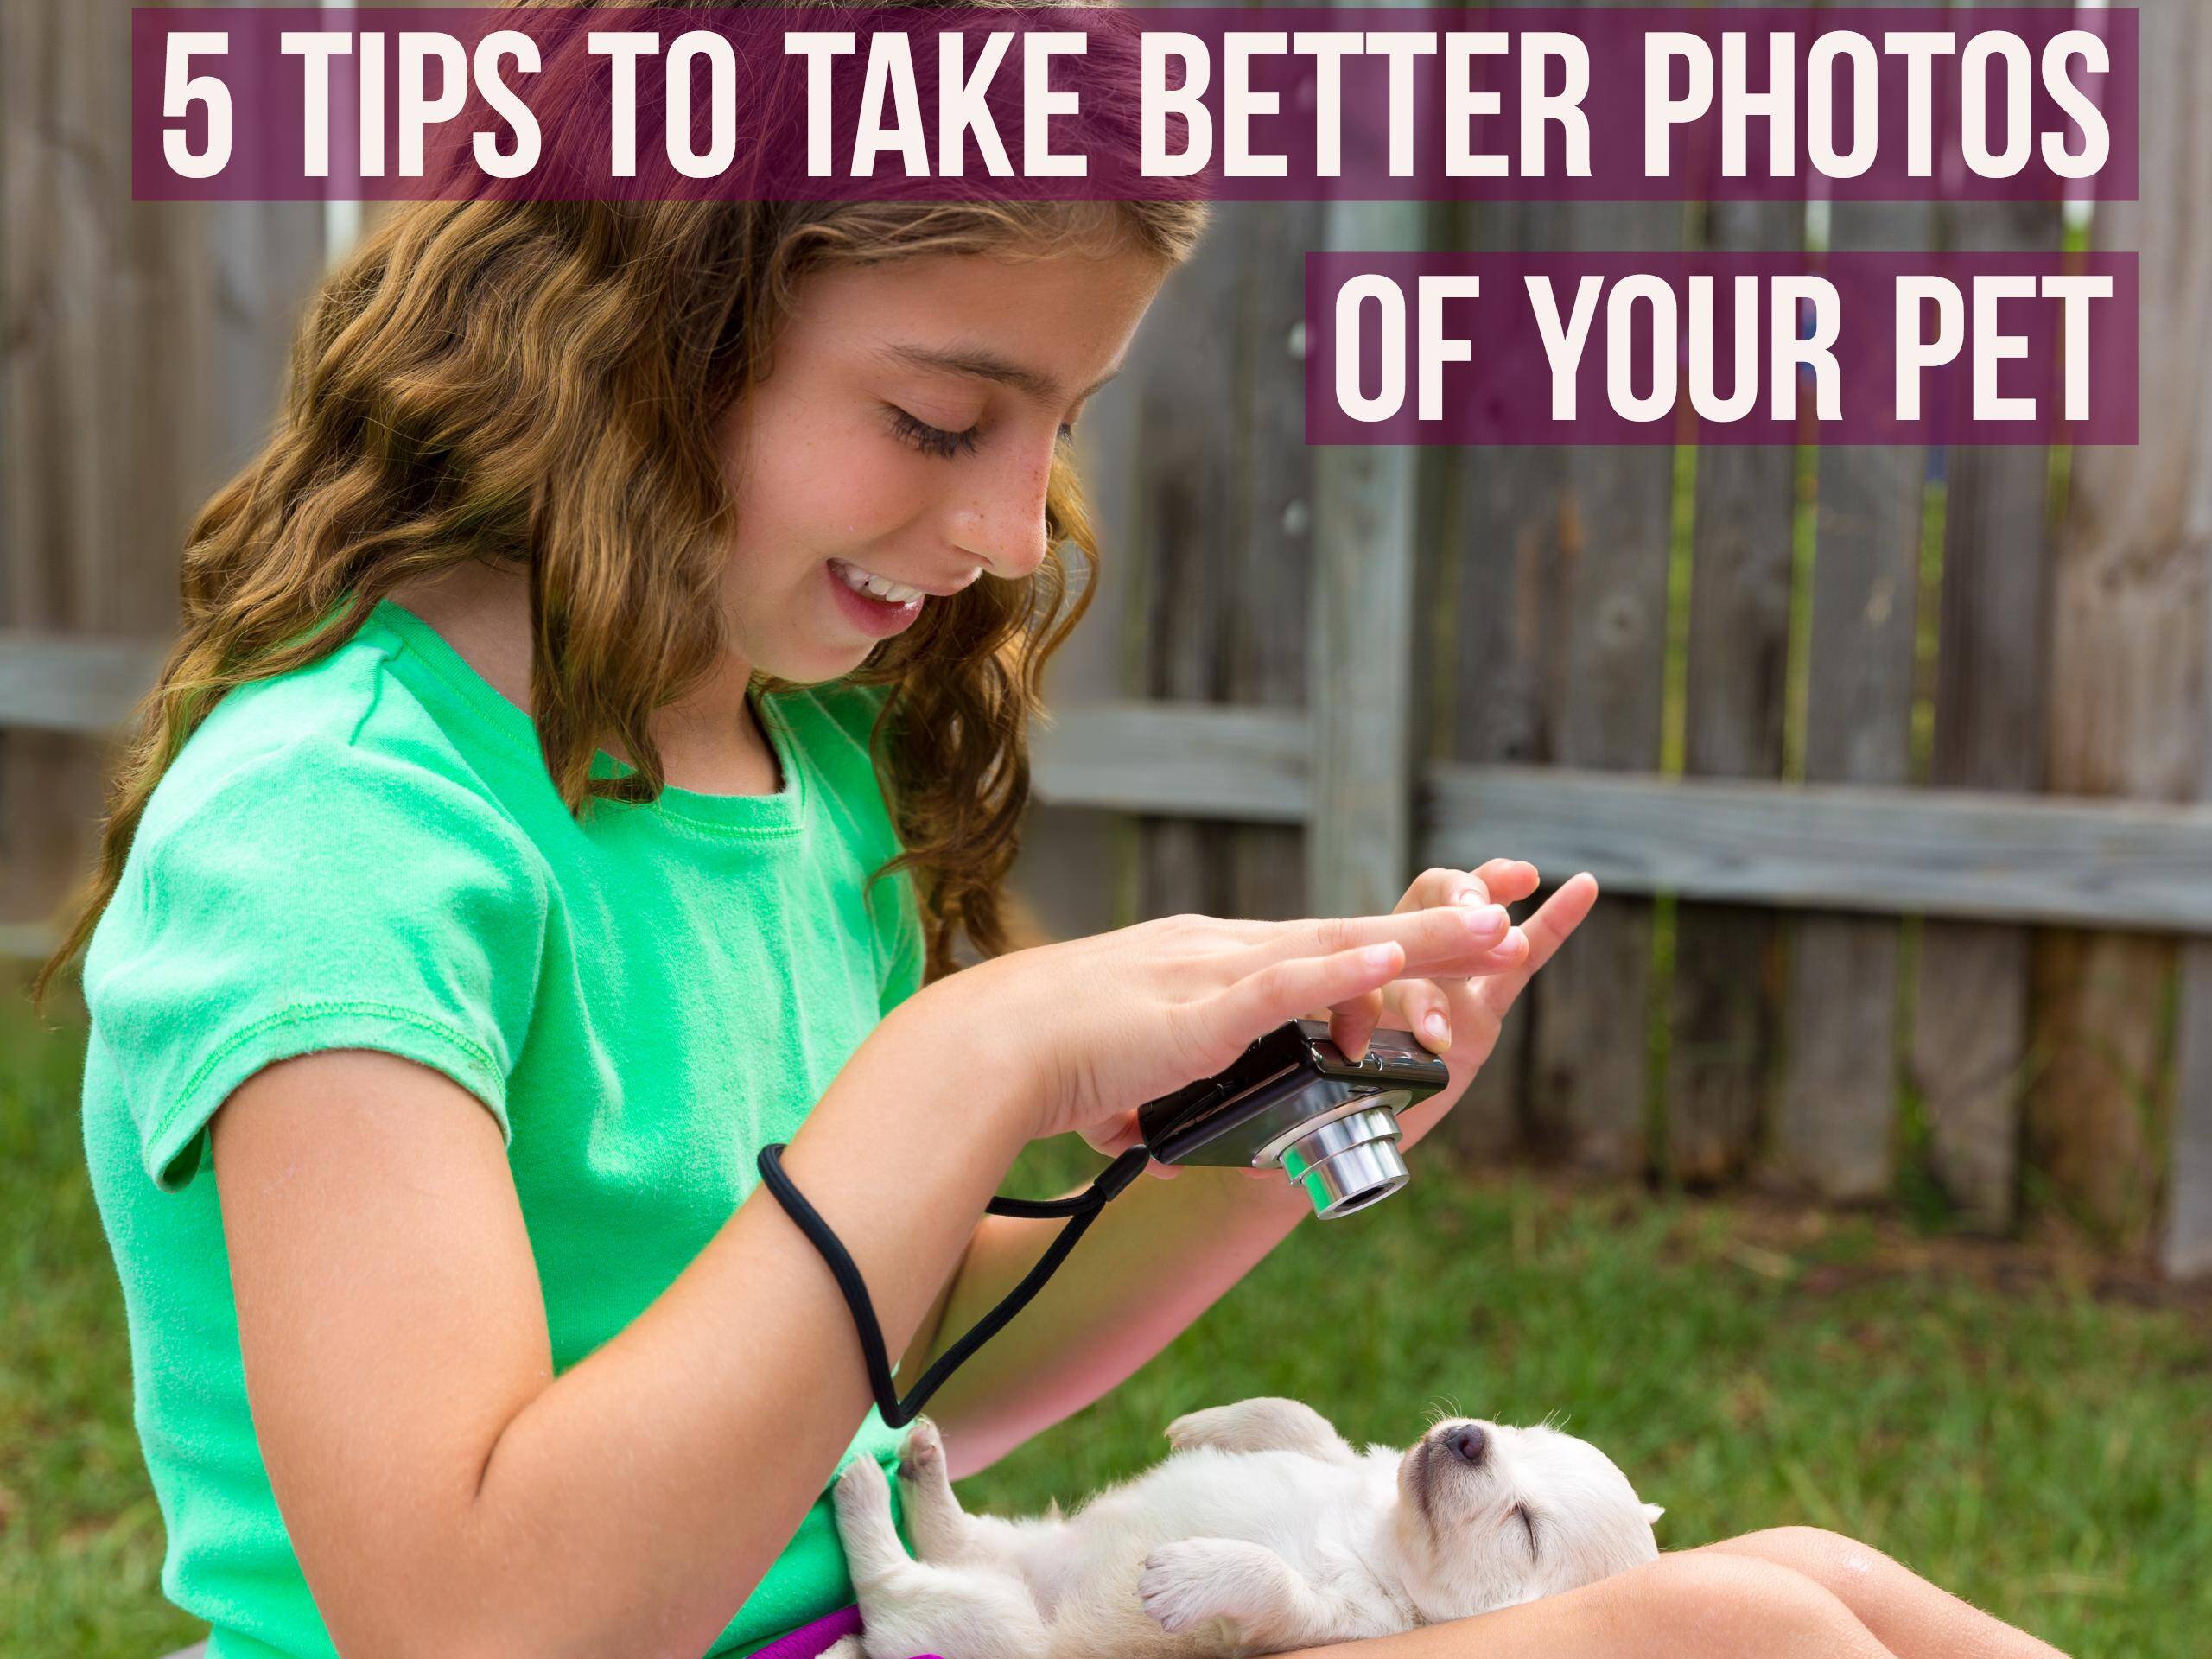 5 Tips To Take Better Photos of Your Pet